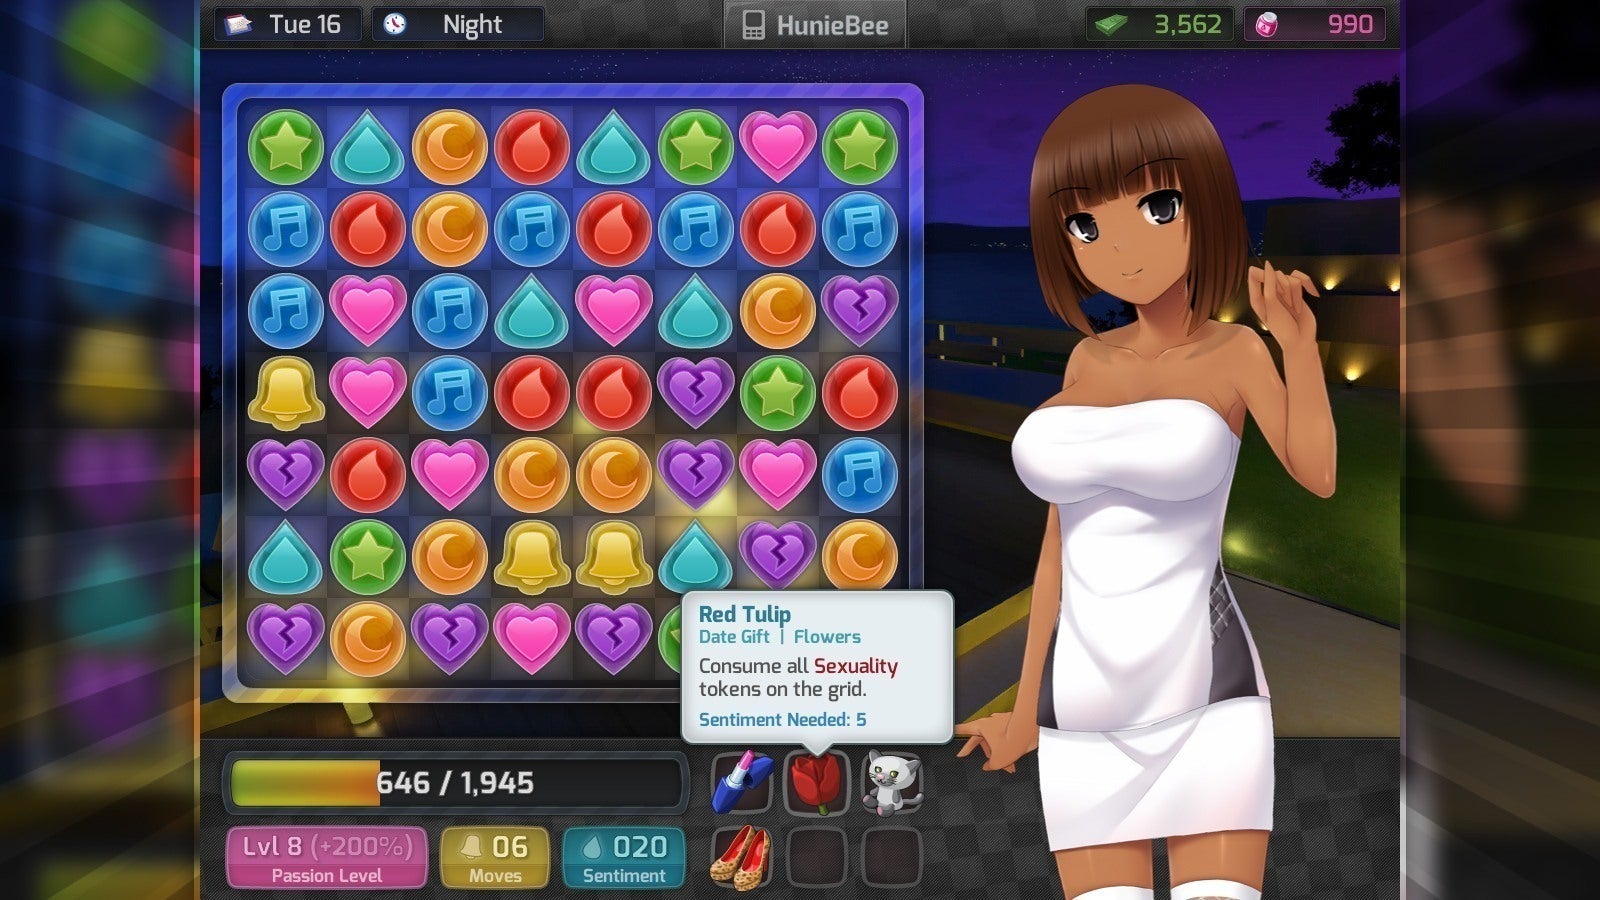 angelique montgomery recommends how to get huniepop uncensored pic